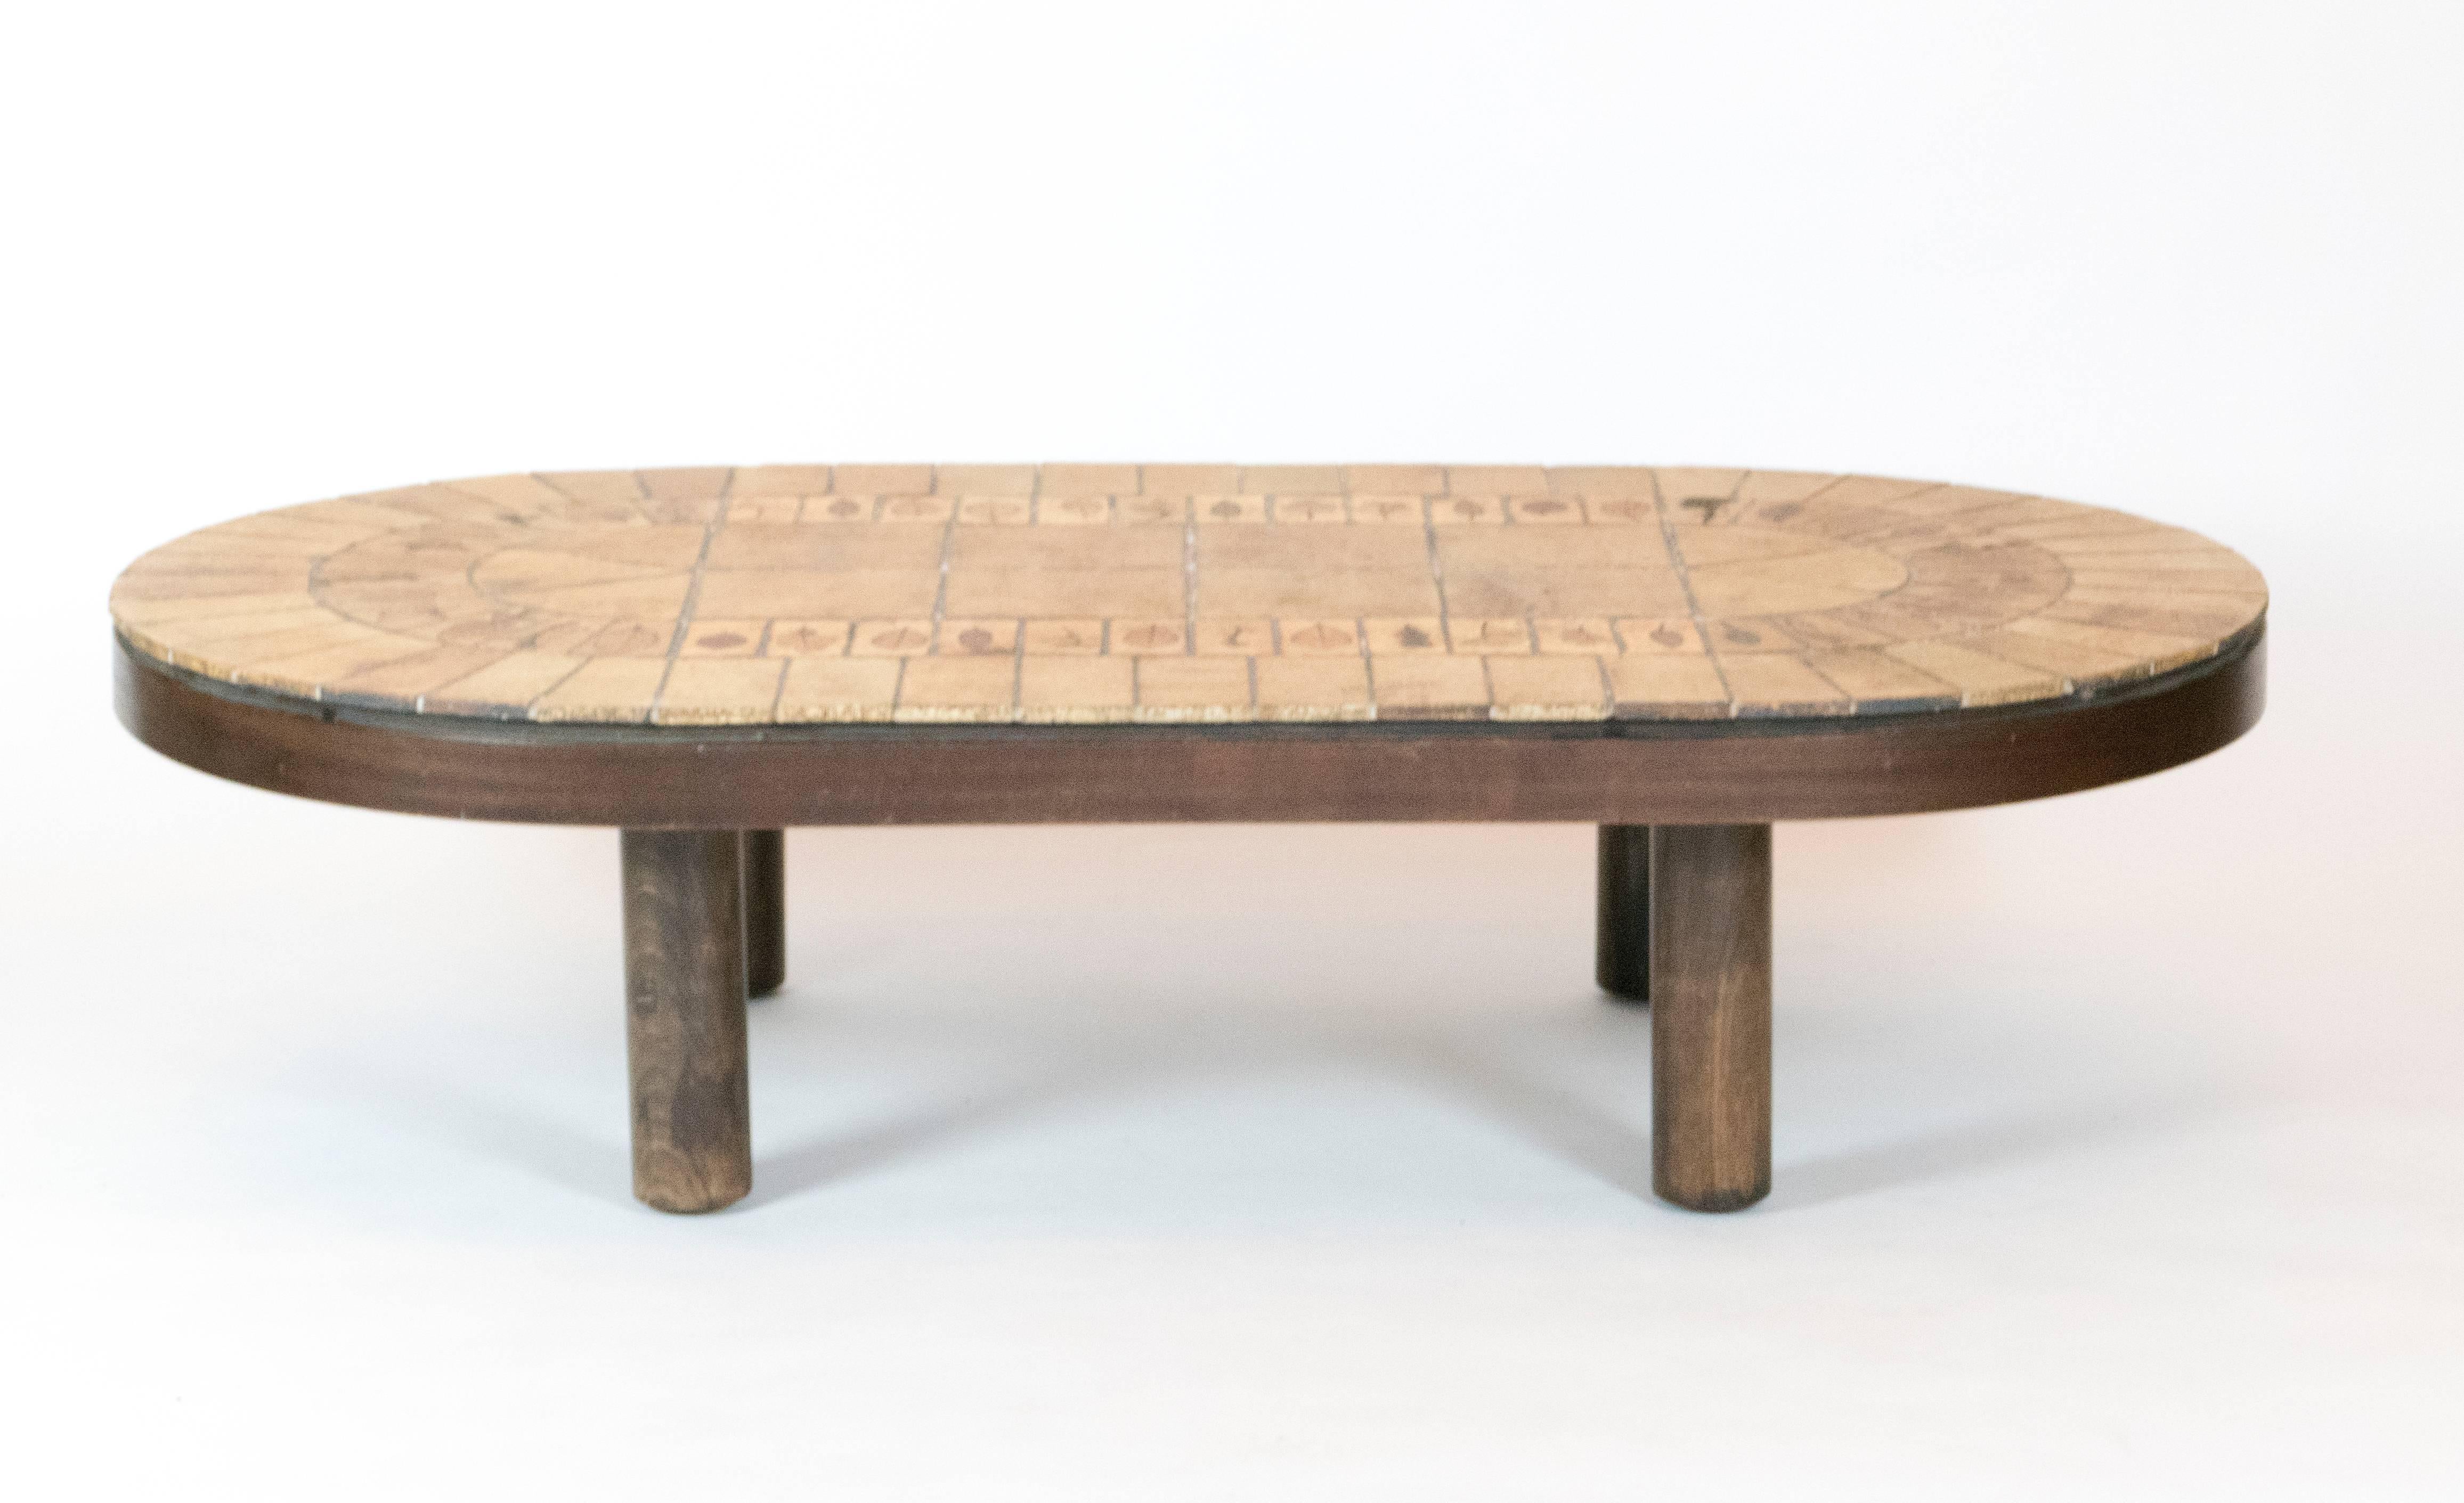 Mid-Century ceramic tiled topped coffee table. This signed table by R. Capron has a walnut frame. The tiles have leafed imprint design of his Herbier style.